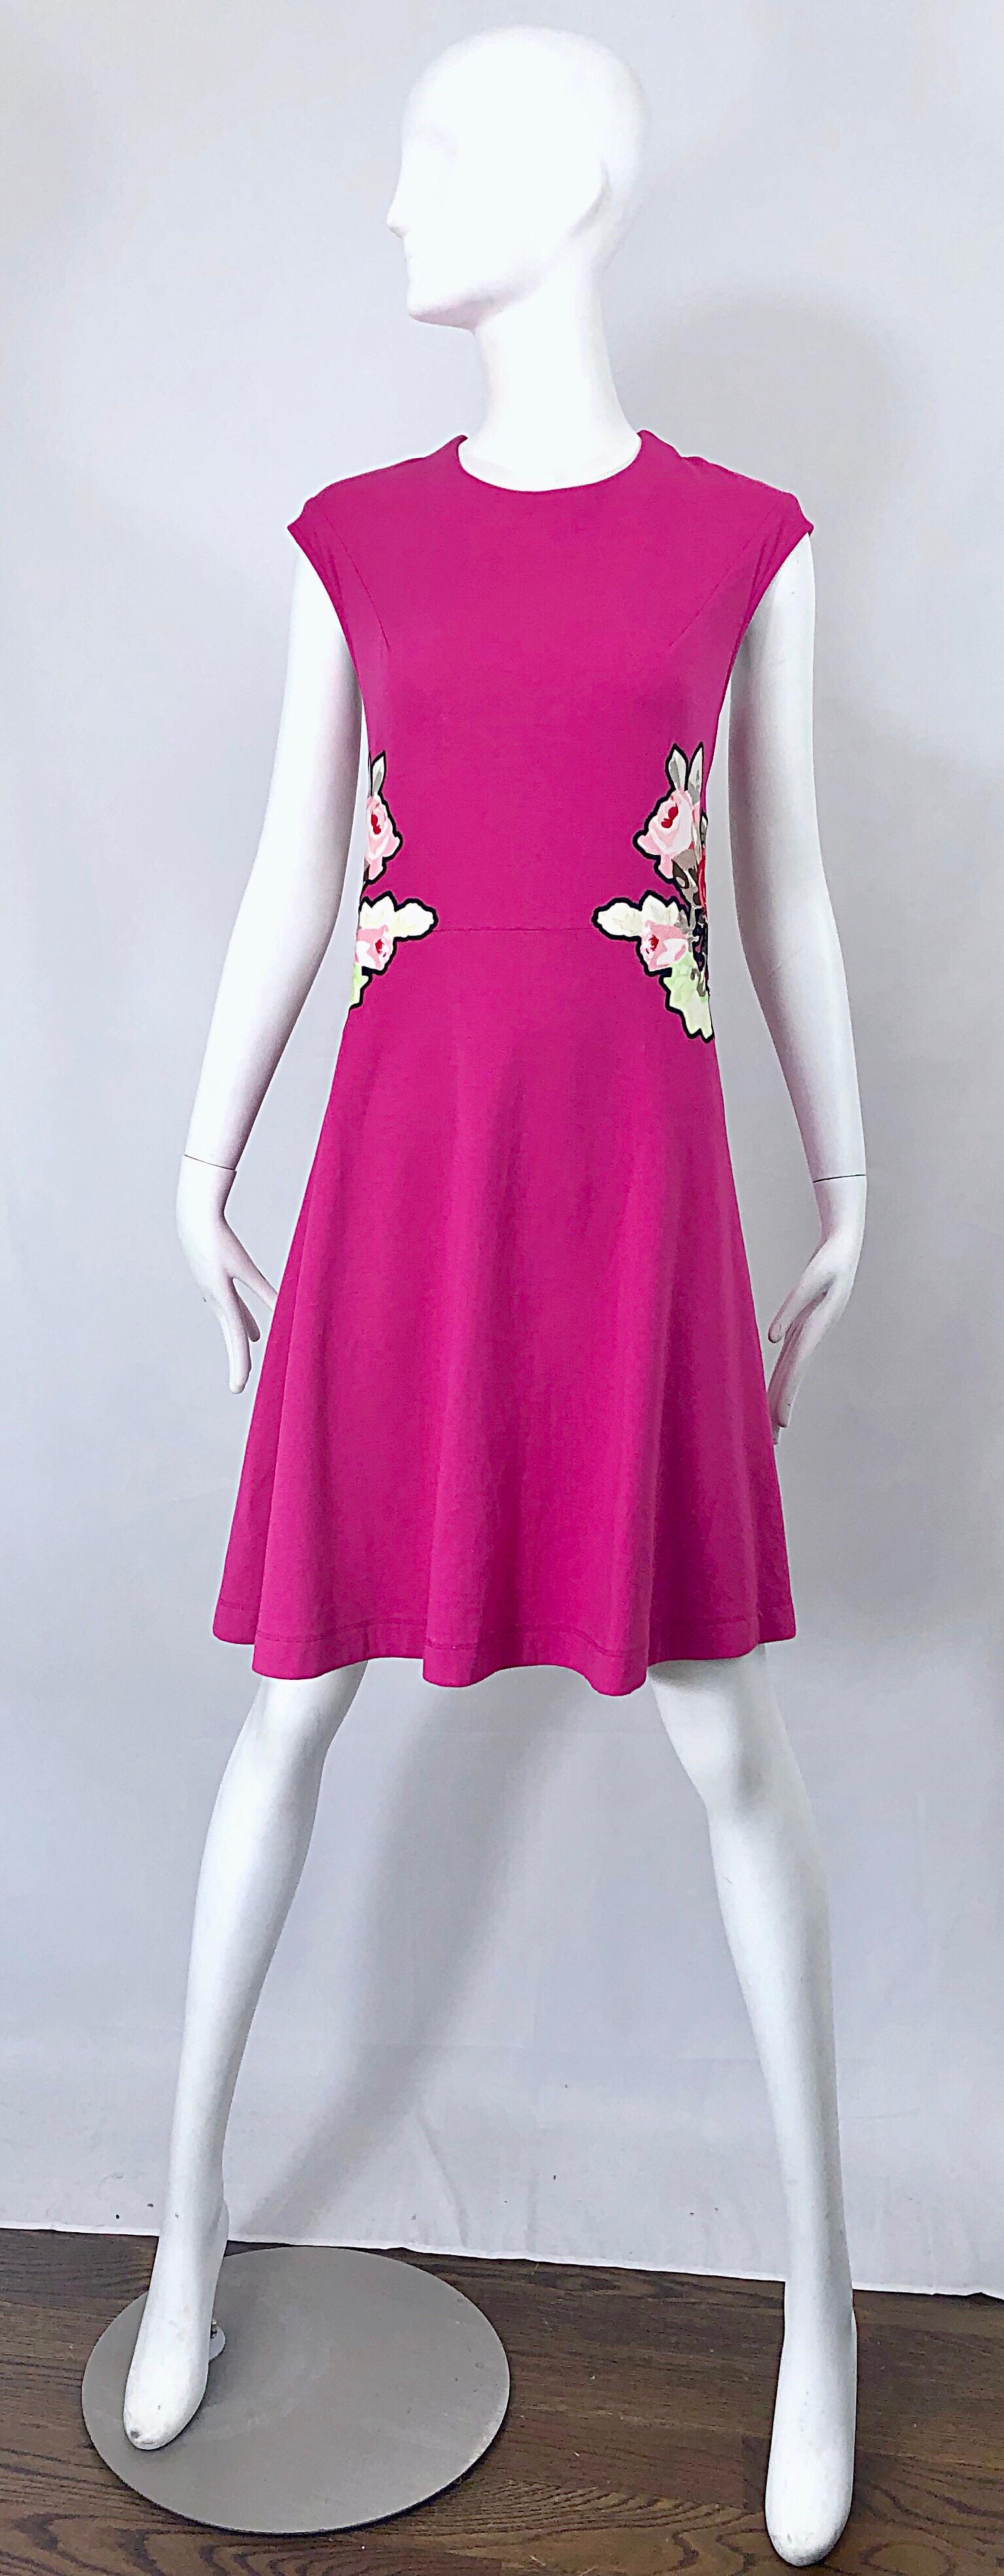 Pretty CARVEN hot pink 'Bouquet of Roses' hot pink A - Line cotton dress! Fitted cap sleeve bodice with a forgiving flattering skirt. Large slimming roses patch at each side of the waist. Vibrant colors of pastel green, light pink, red, brown, grey